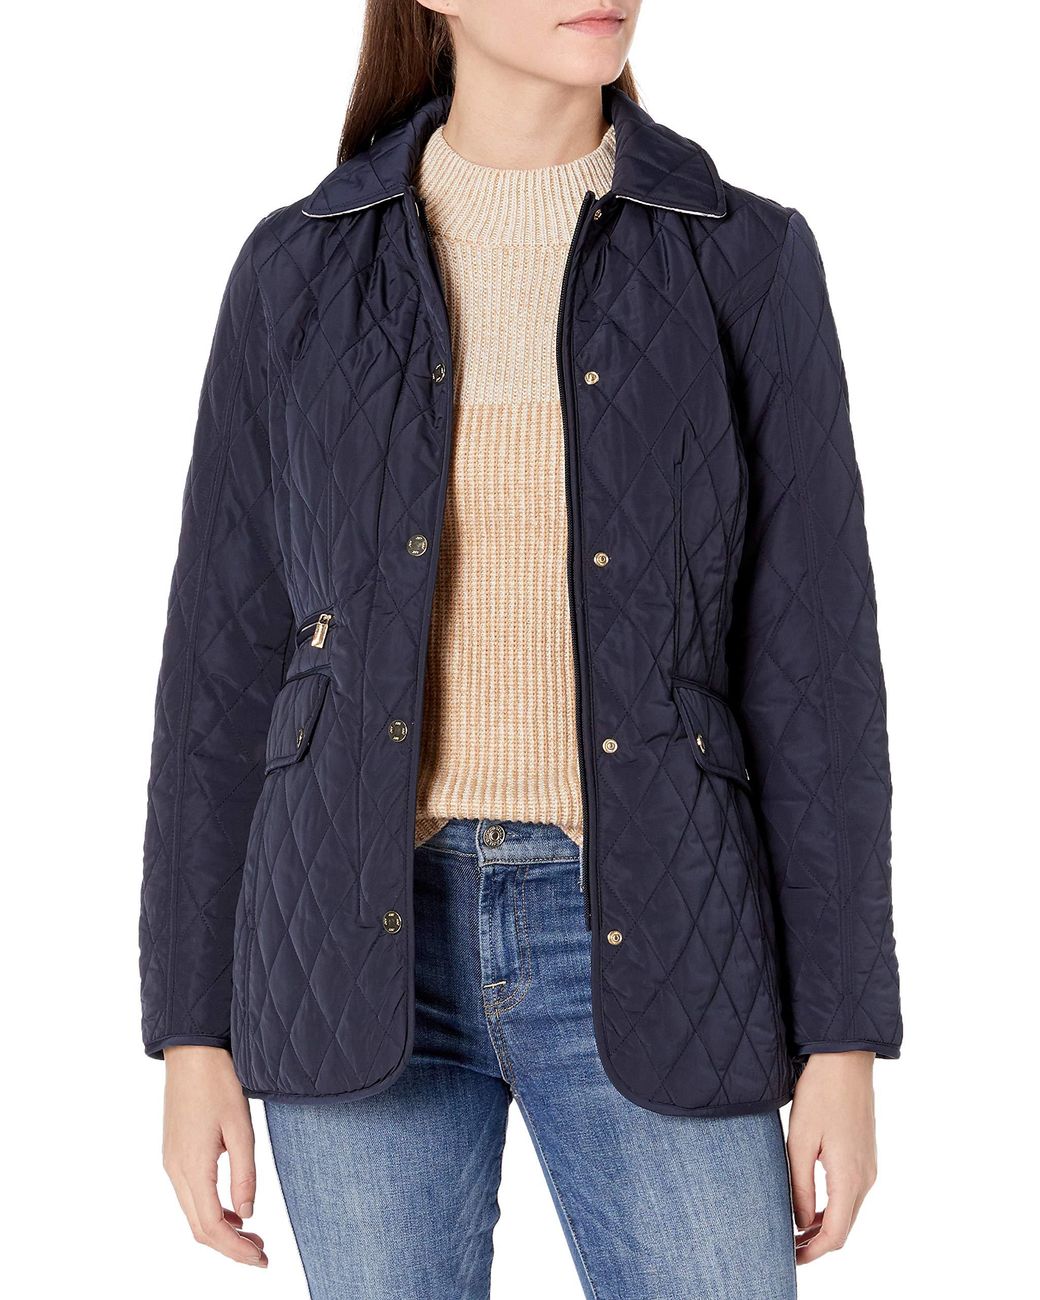 Jones New York Quilted Jacket With Hood in Navy (Blue) - Lyst